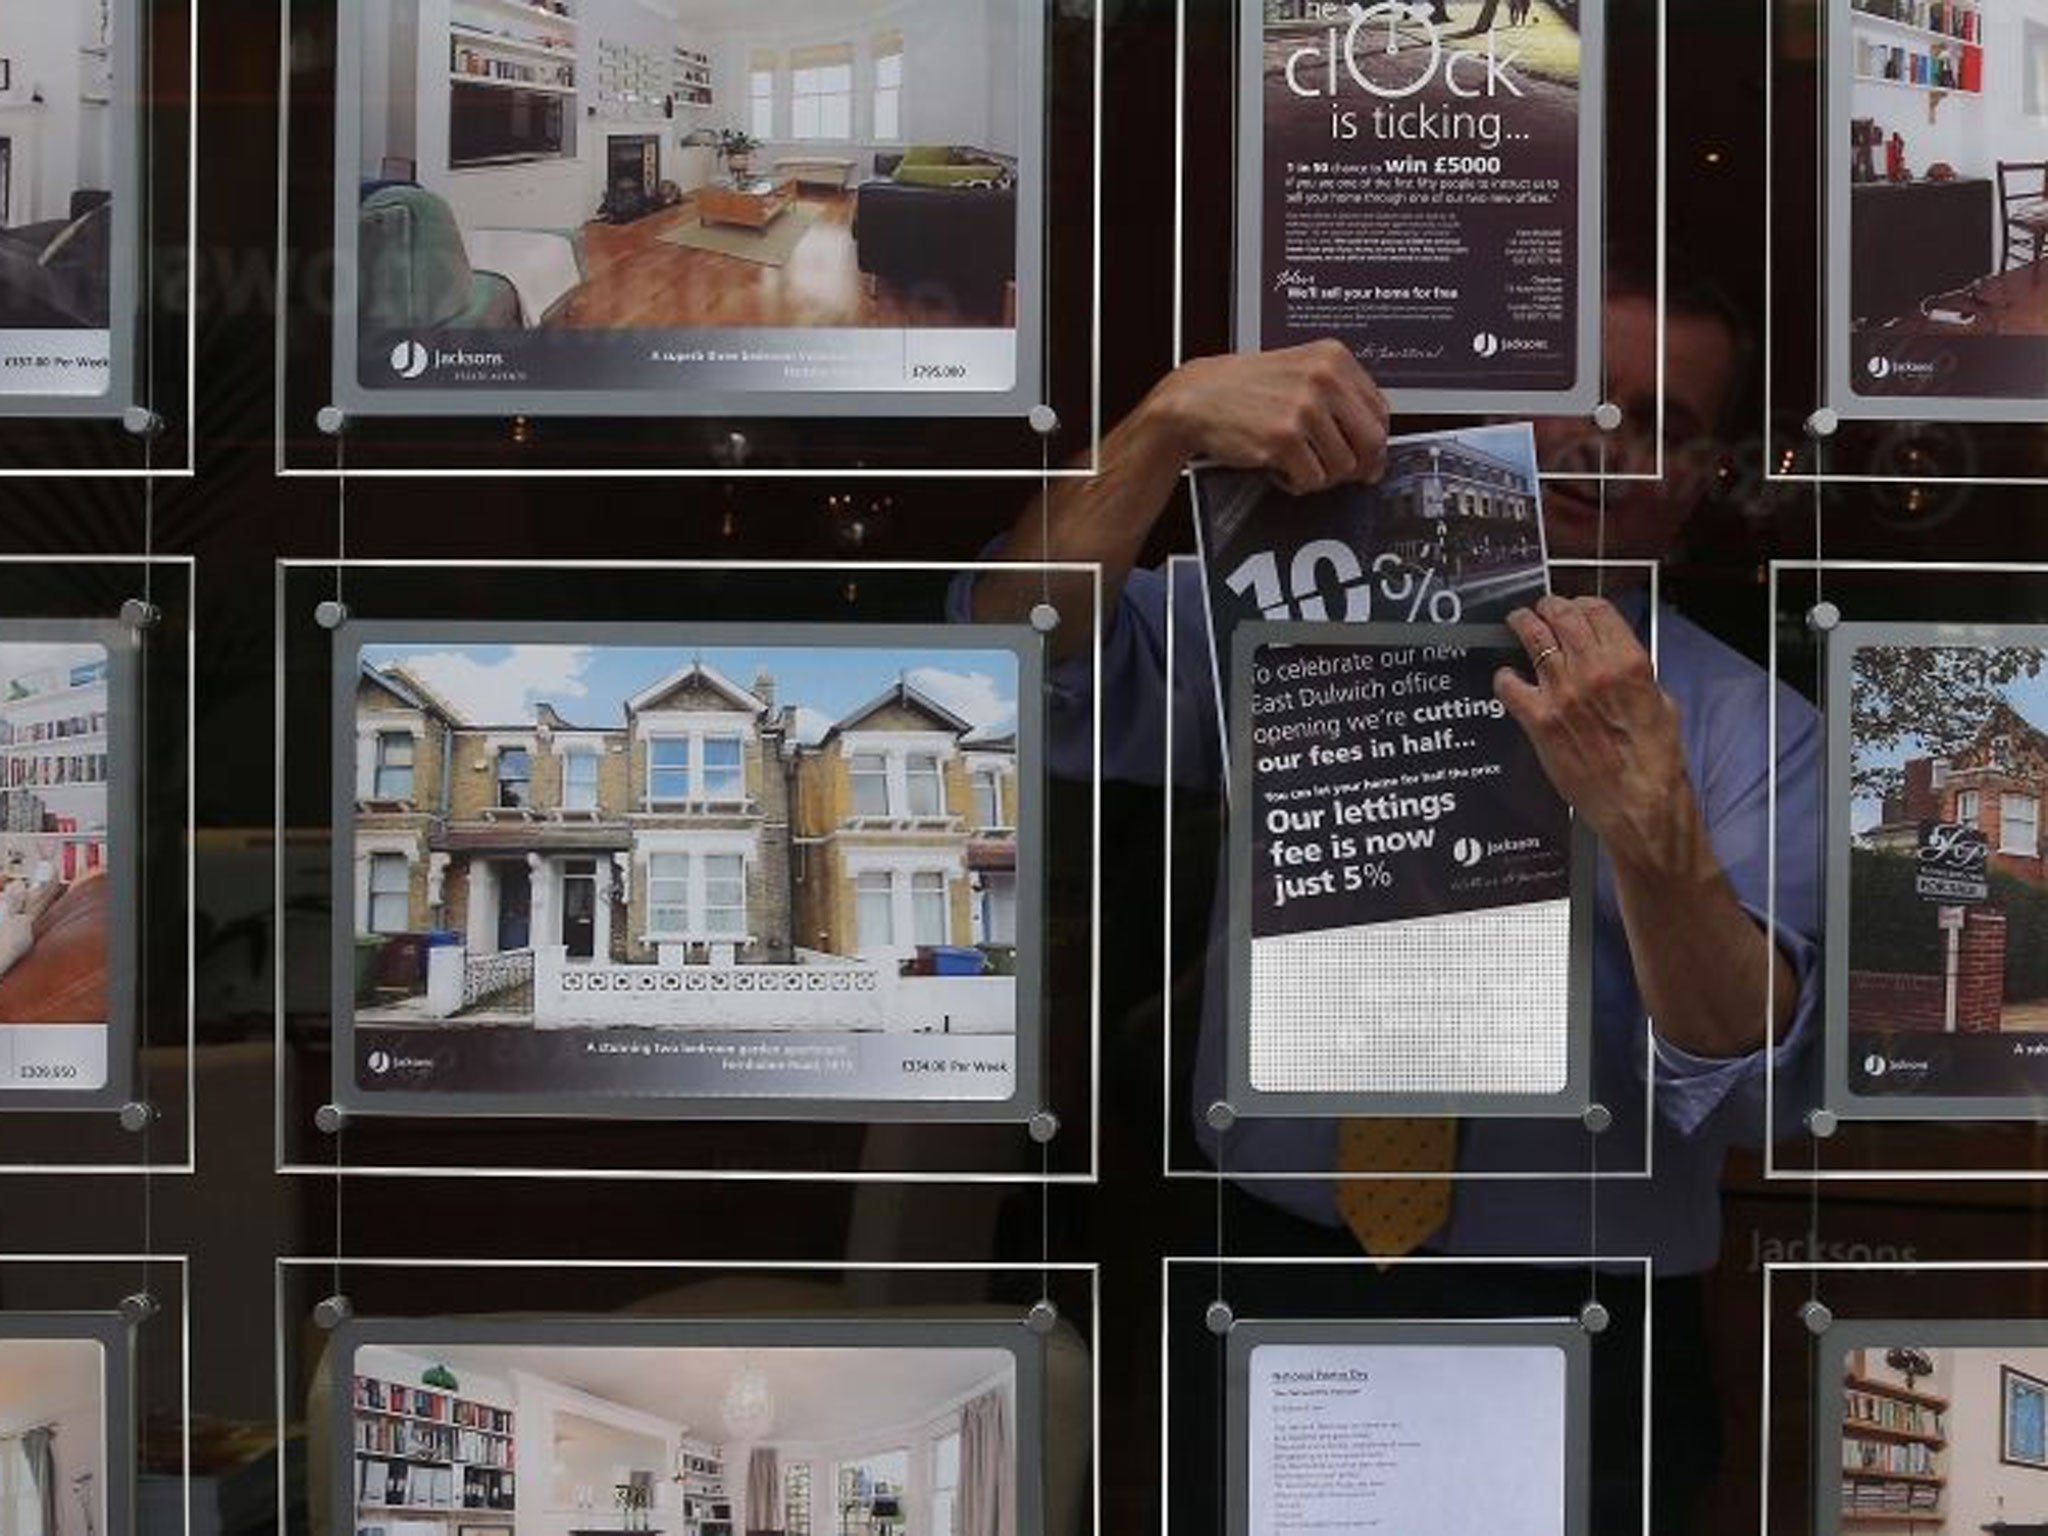 Window of opportunity? While the Government’s Help to Buy scheme promises to help new homebuyers across the threshold, the rates are not that cheap